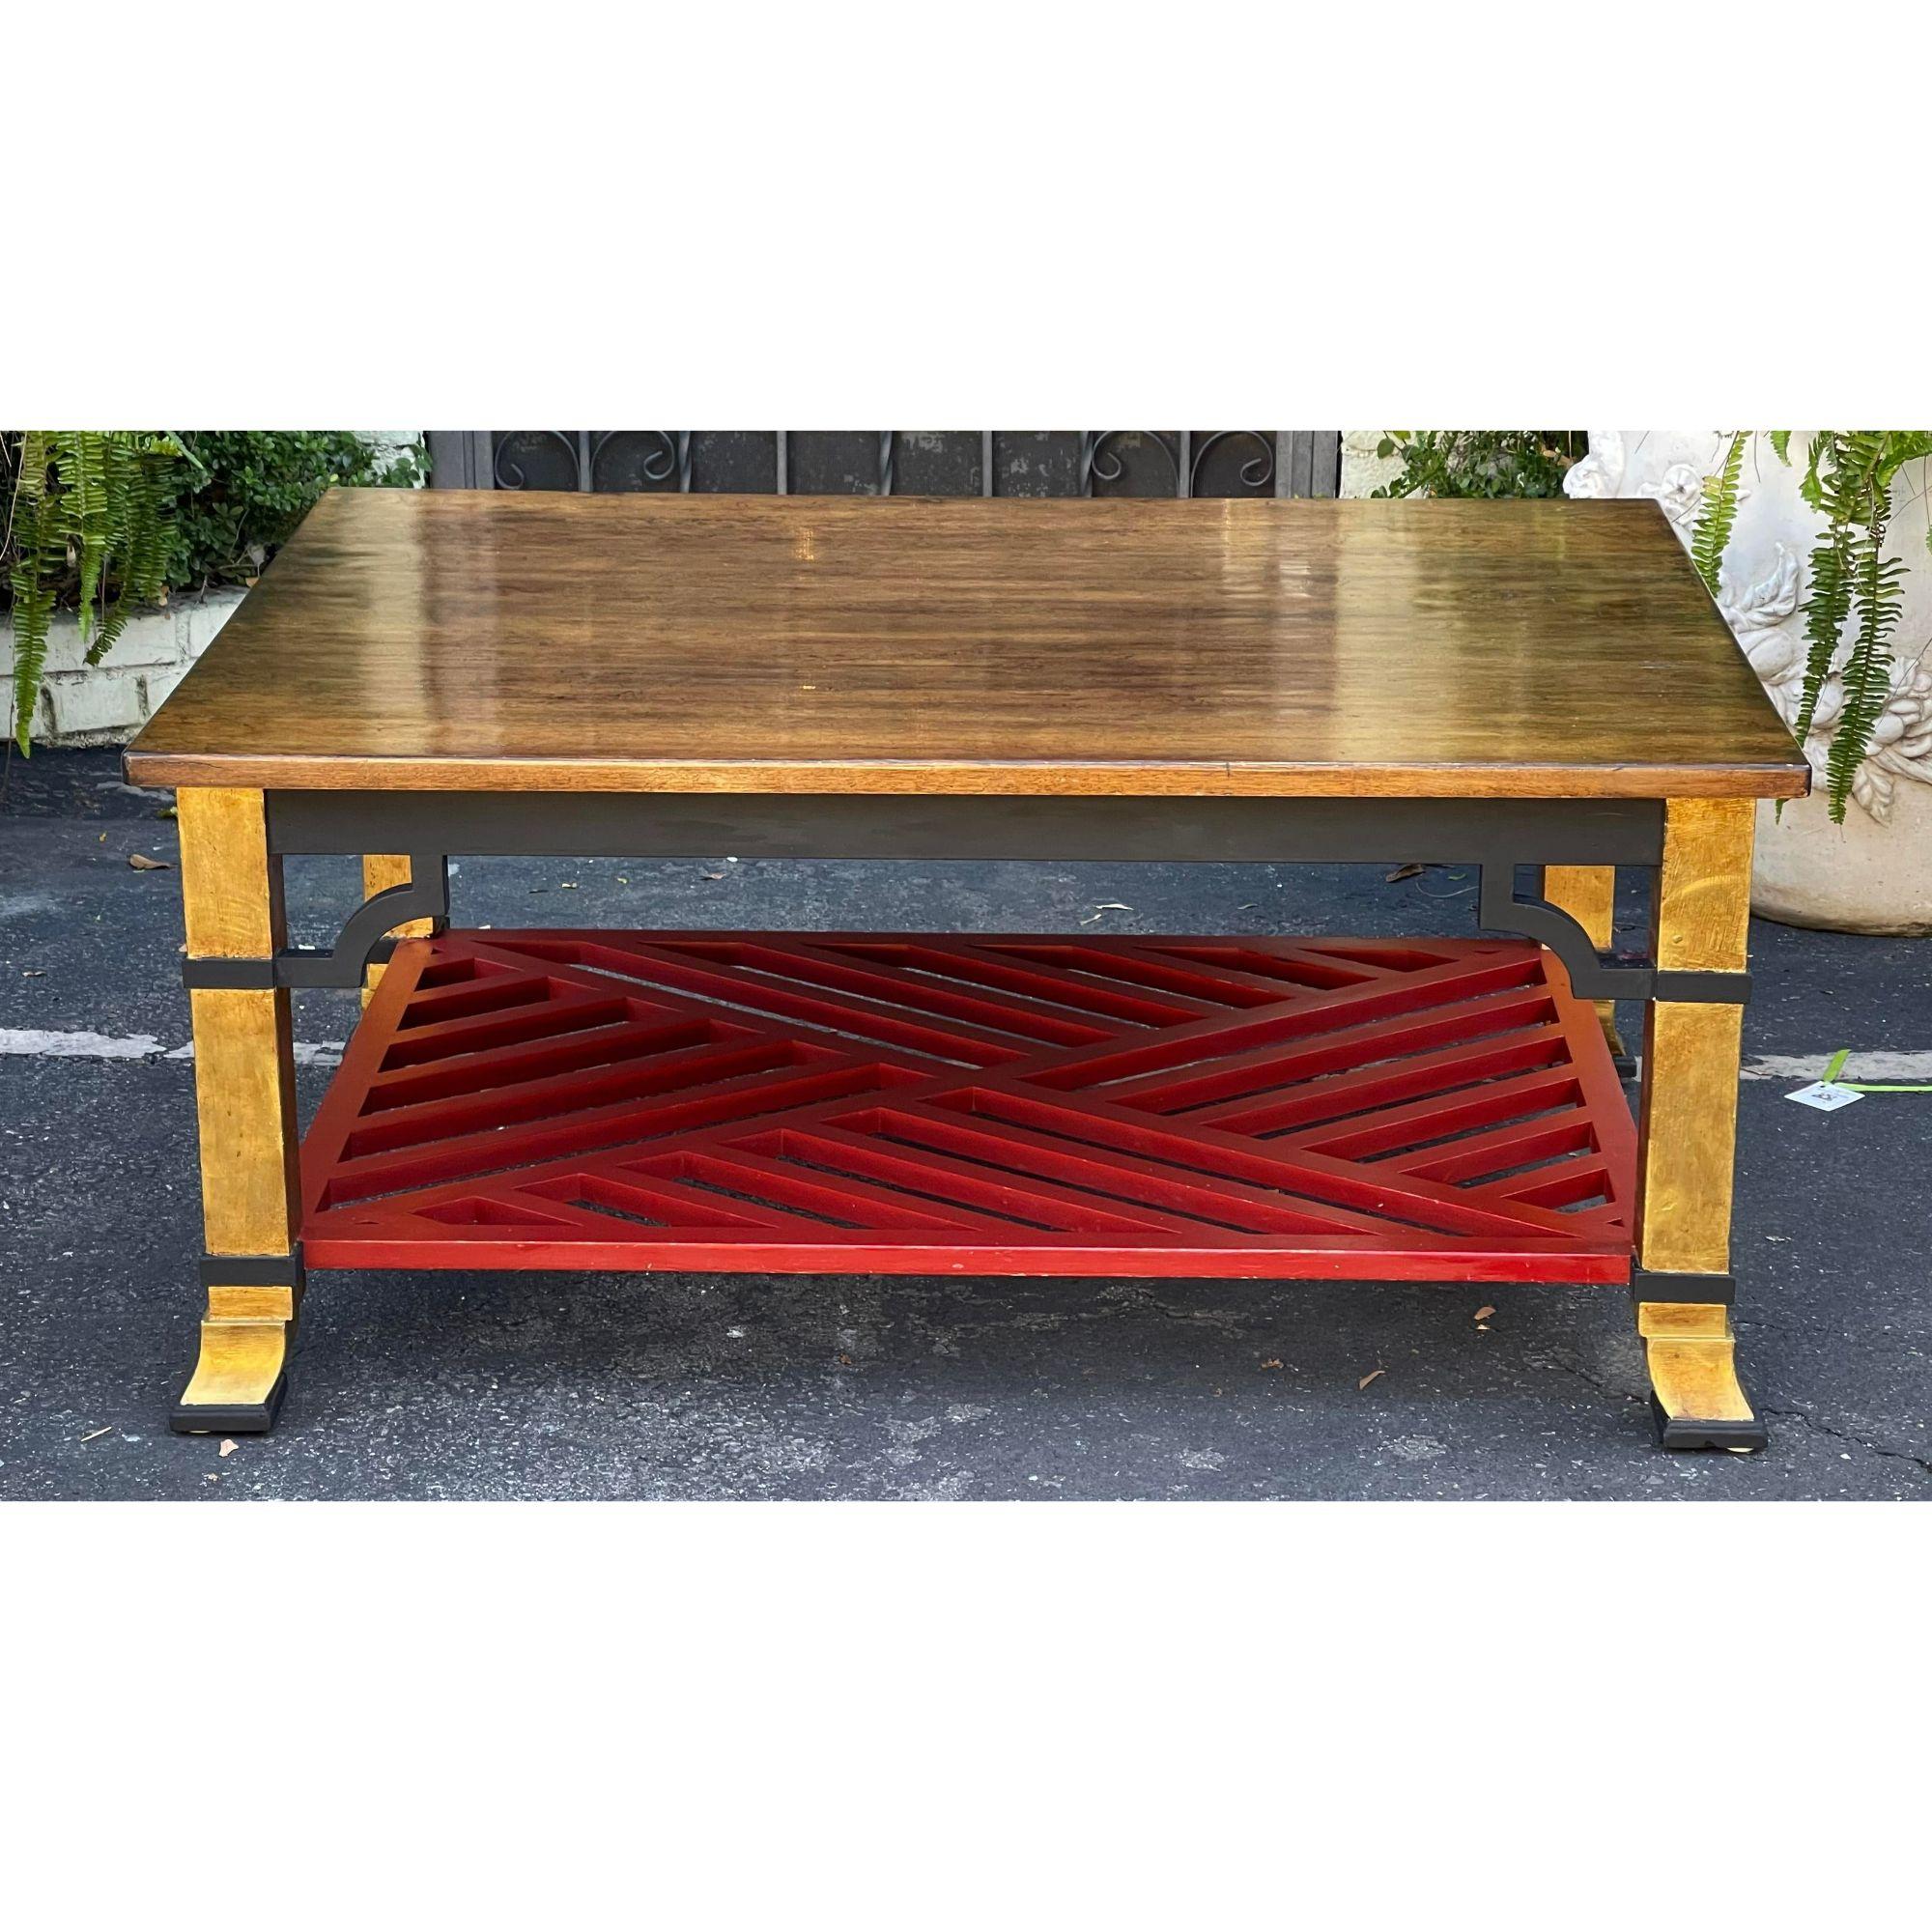 Minton-Spidell parcel gilt and ebonized & rouge grille coffee table

Additional information: 
Materials: Giltwood
Color: Red
Brand: Minton-Spidell
Designer: Minton-Spidell
Period: 2010s
Styles: Art Deco
Table Shape: Rectangle 
Item Type: